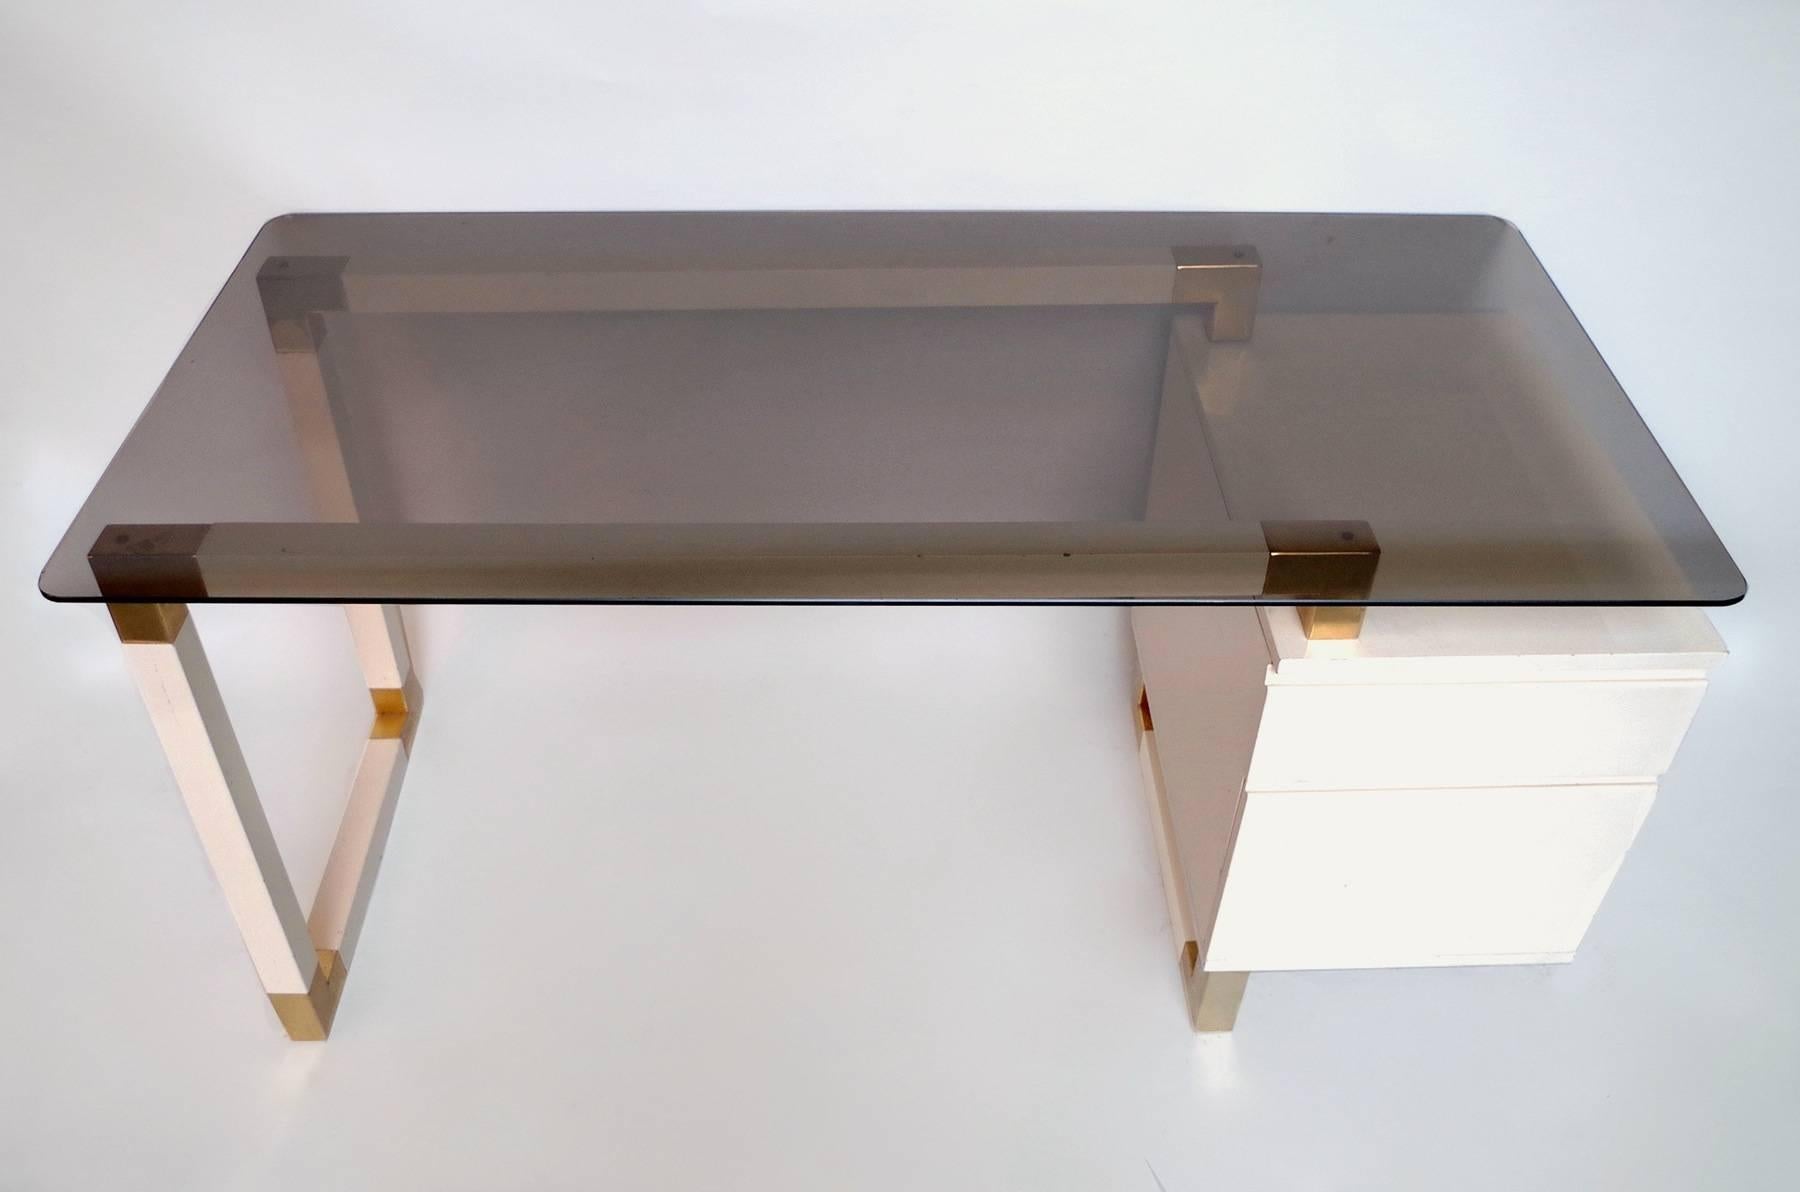 20th Century Desk with a Box of Drawers in White Lacquer, Pierre Cardin Style, circa 1970